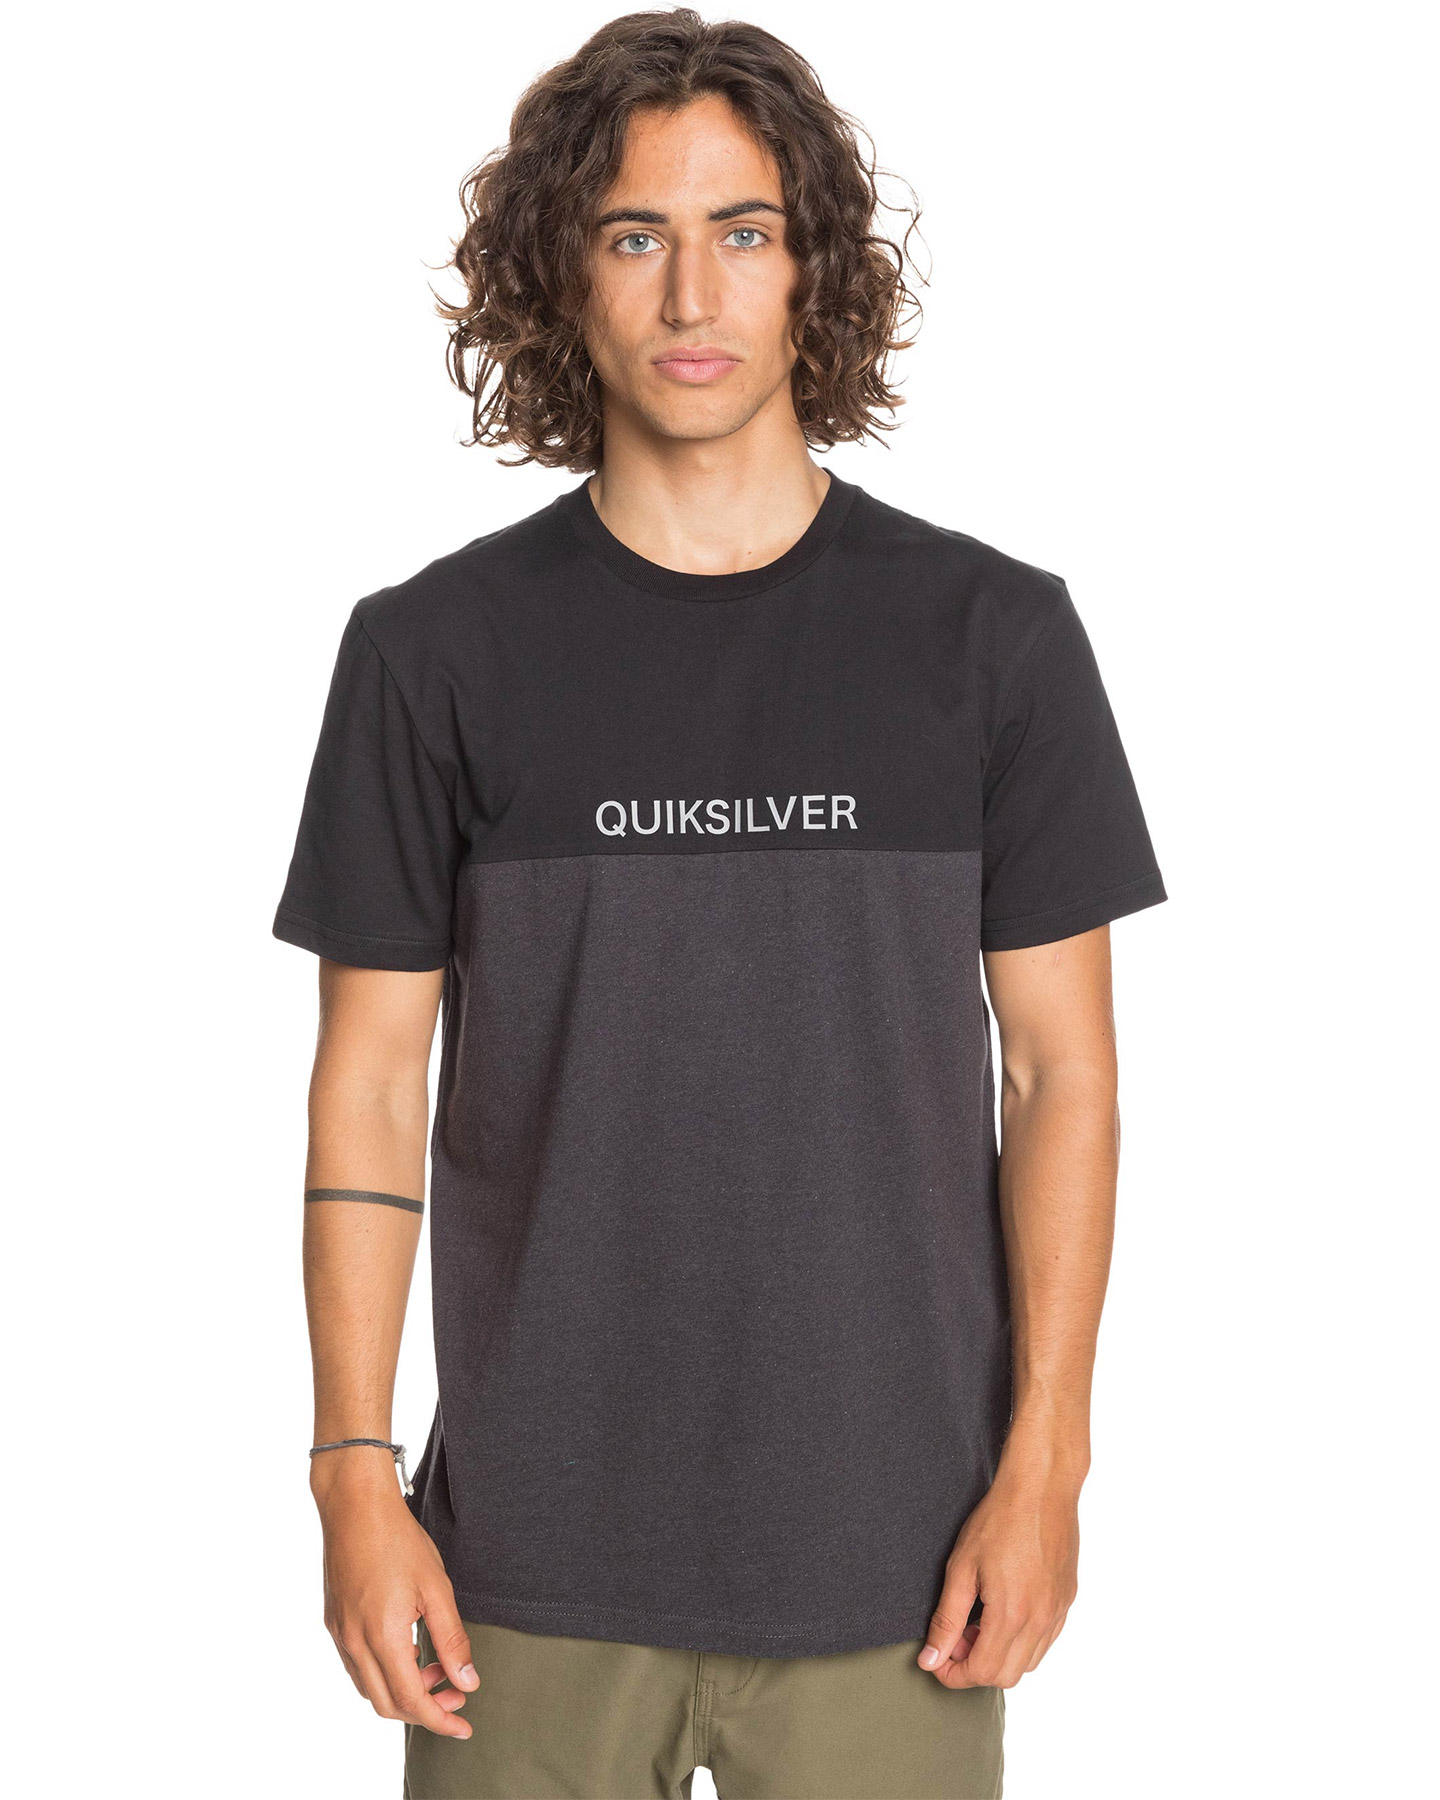 Quiksilver Mens Quiver Water Tee - Black | SurfStitch